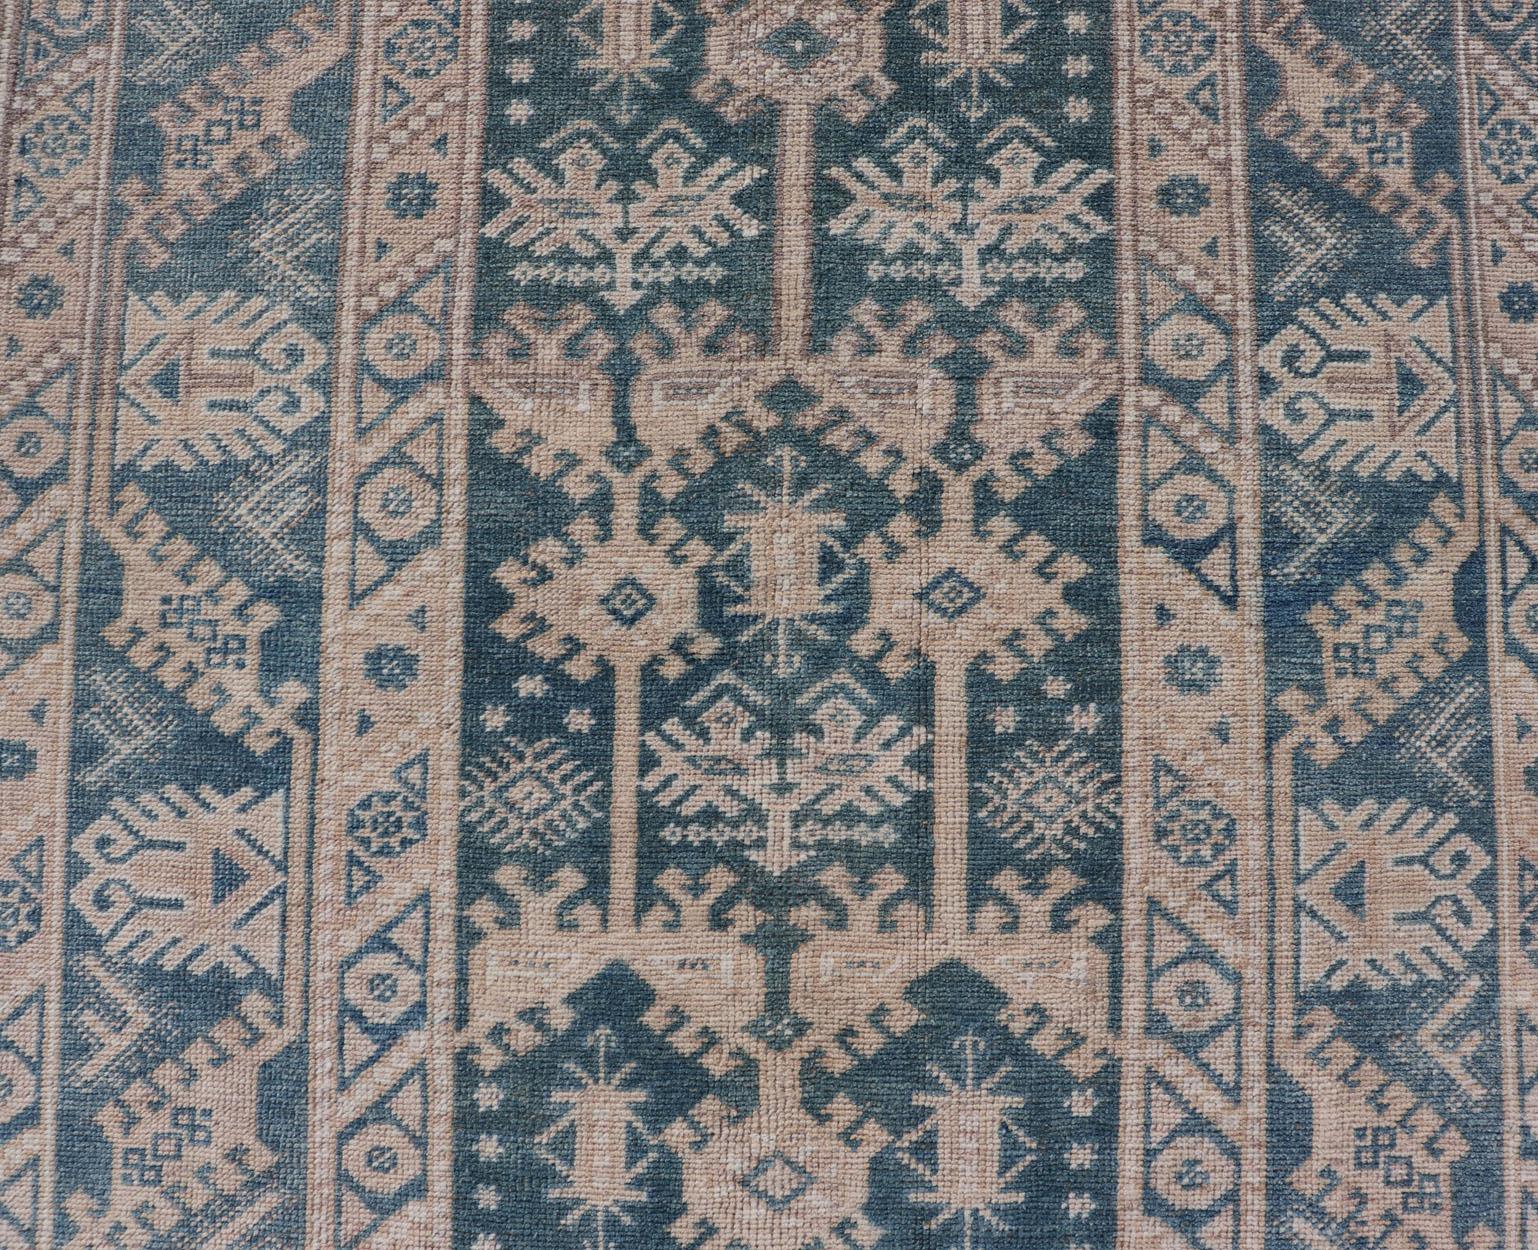 Blue and Cream Turkish Oushak Rug Vintage with All-Over Motif Design For Sale 4